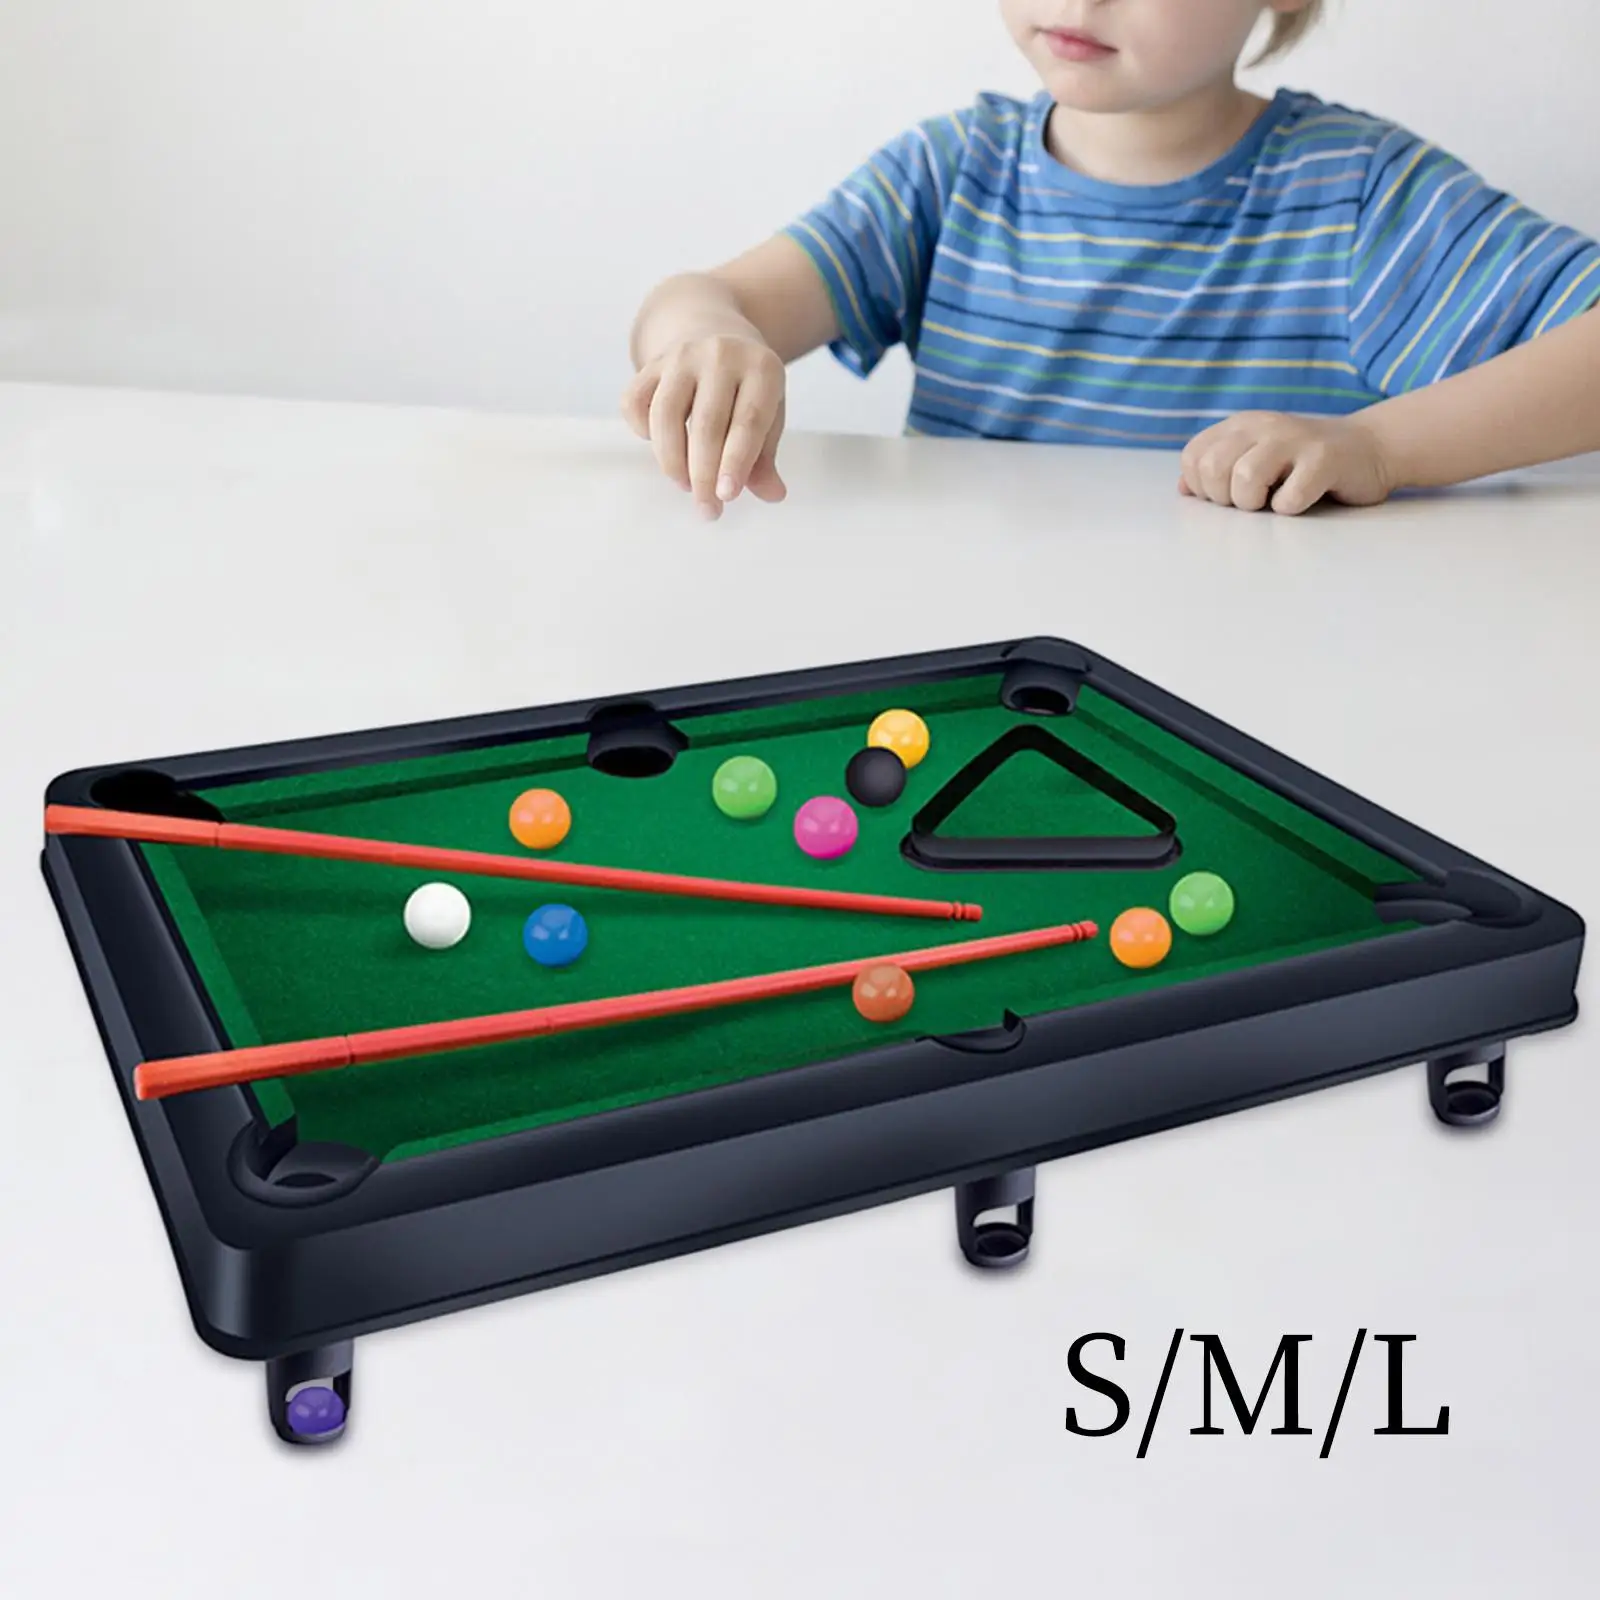 Mini Tabletop Pool Set Billiards Game Tabletop Pool Table Game Set with Game Balls for Desk Living Room Playroom Party Office